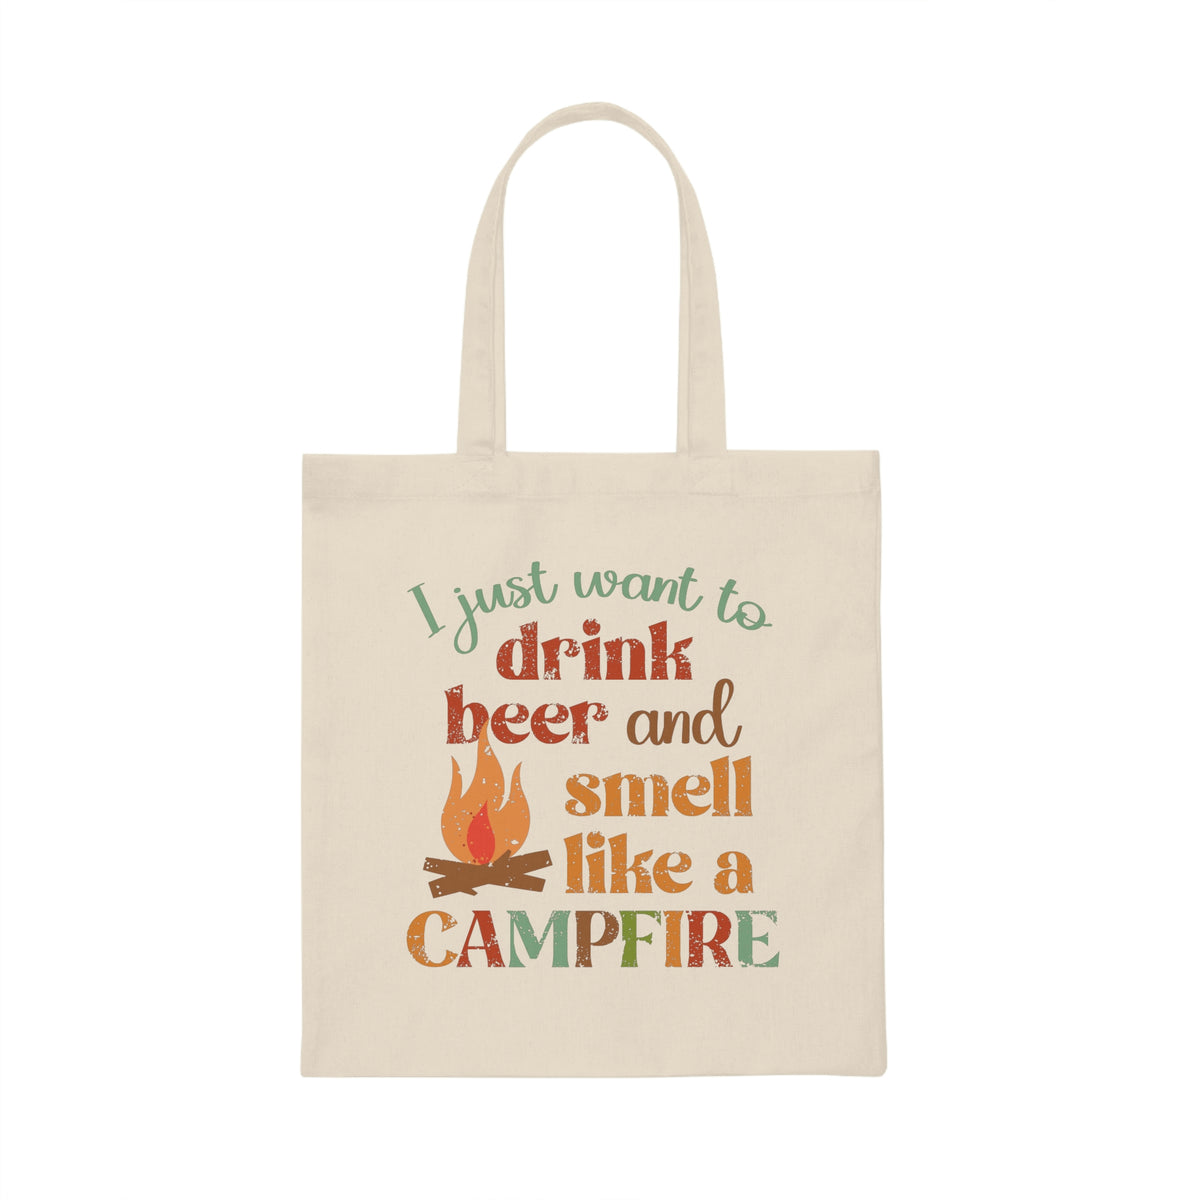 Smell Like a Campfire Beer Tote Bag | Camping Tote | Camping Gifts | Canvas Tote Bag